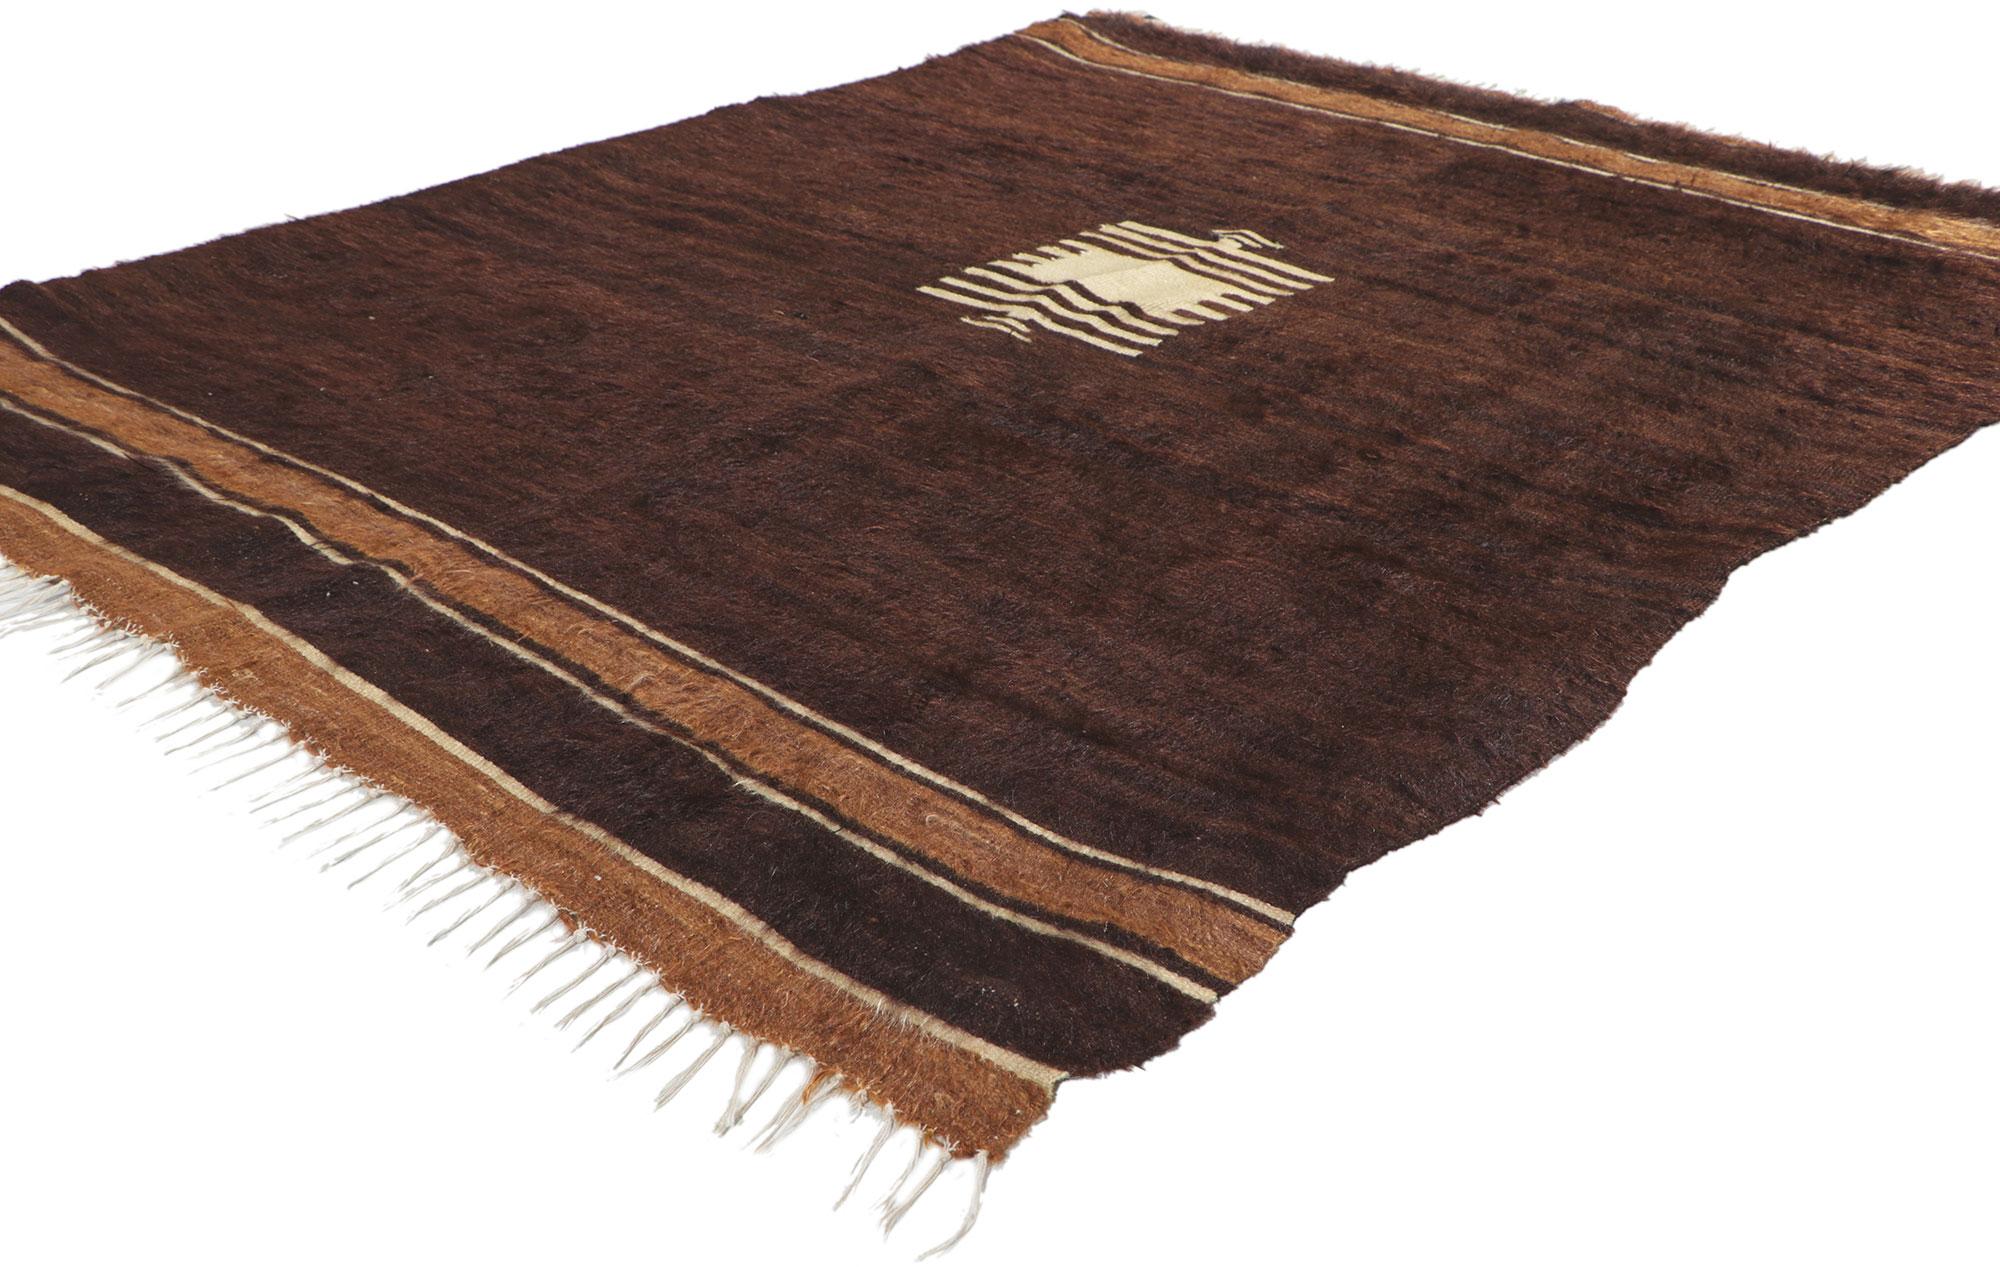 53854 Vintage Turkish Angora Wool Blanket Kilim rug, 04'00 x 05'02. With its shaggy pile, incredible detail and texture, this handwoven Turkish angora kilim rug is a captivating vision of woven beauty. The eye-catching geometric design and earthy